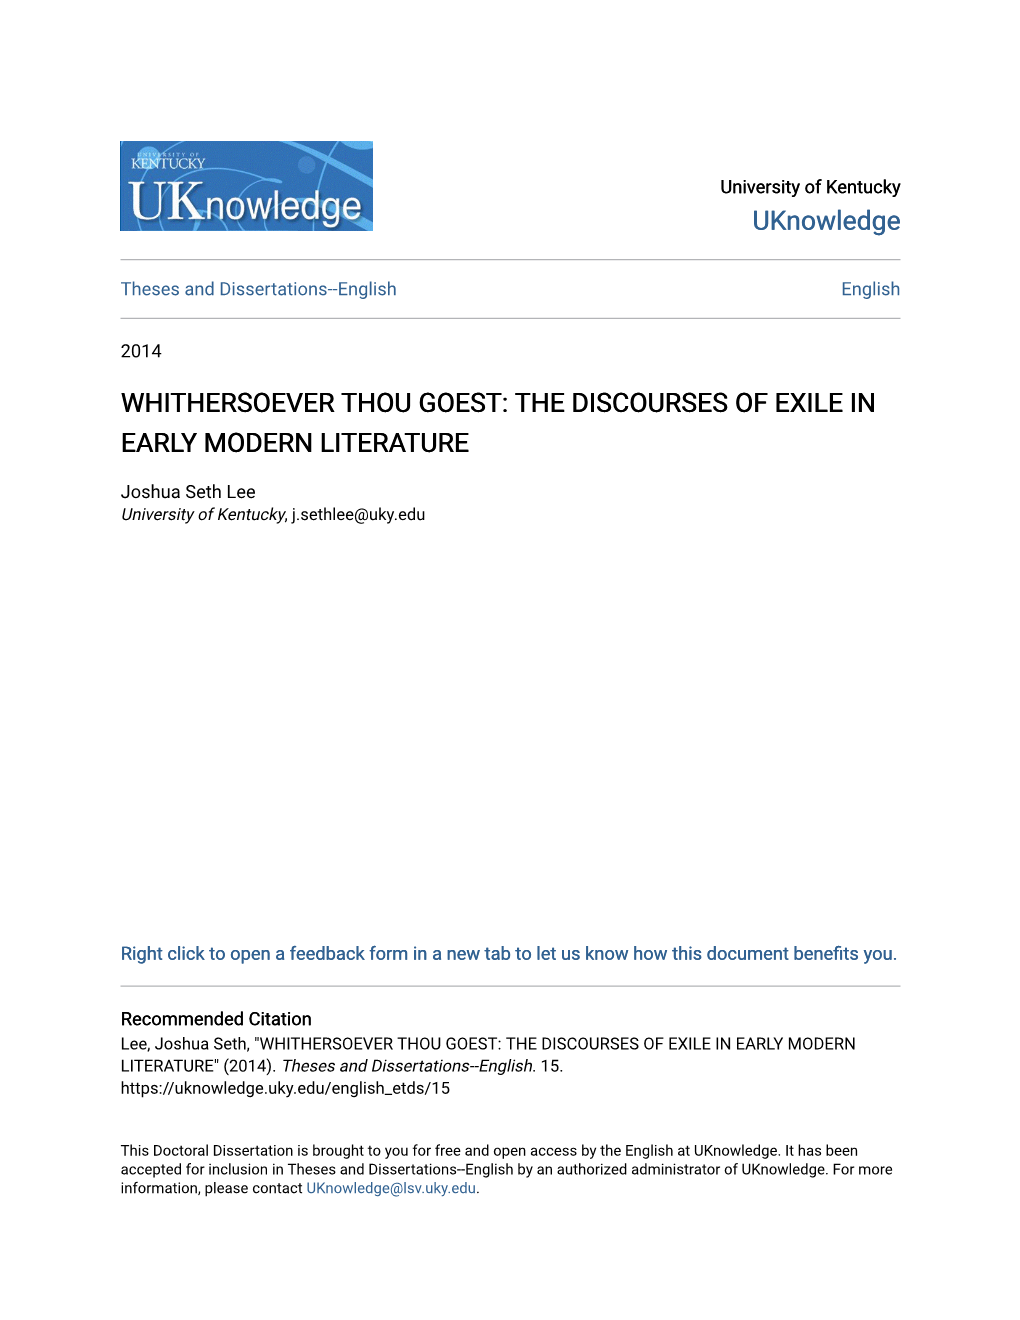 Whithersoever Thou Goest: the Discourses of Exile in Early Modern Literature